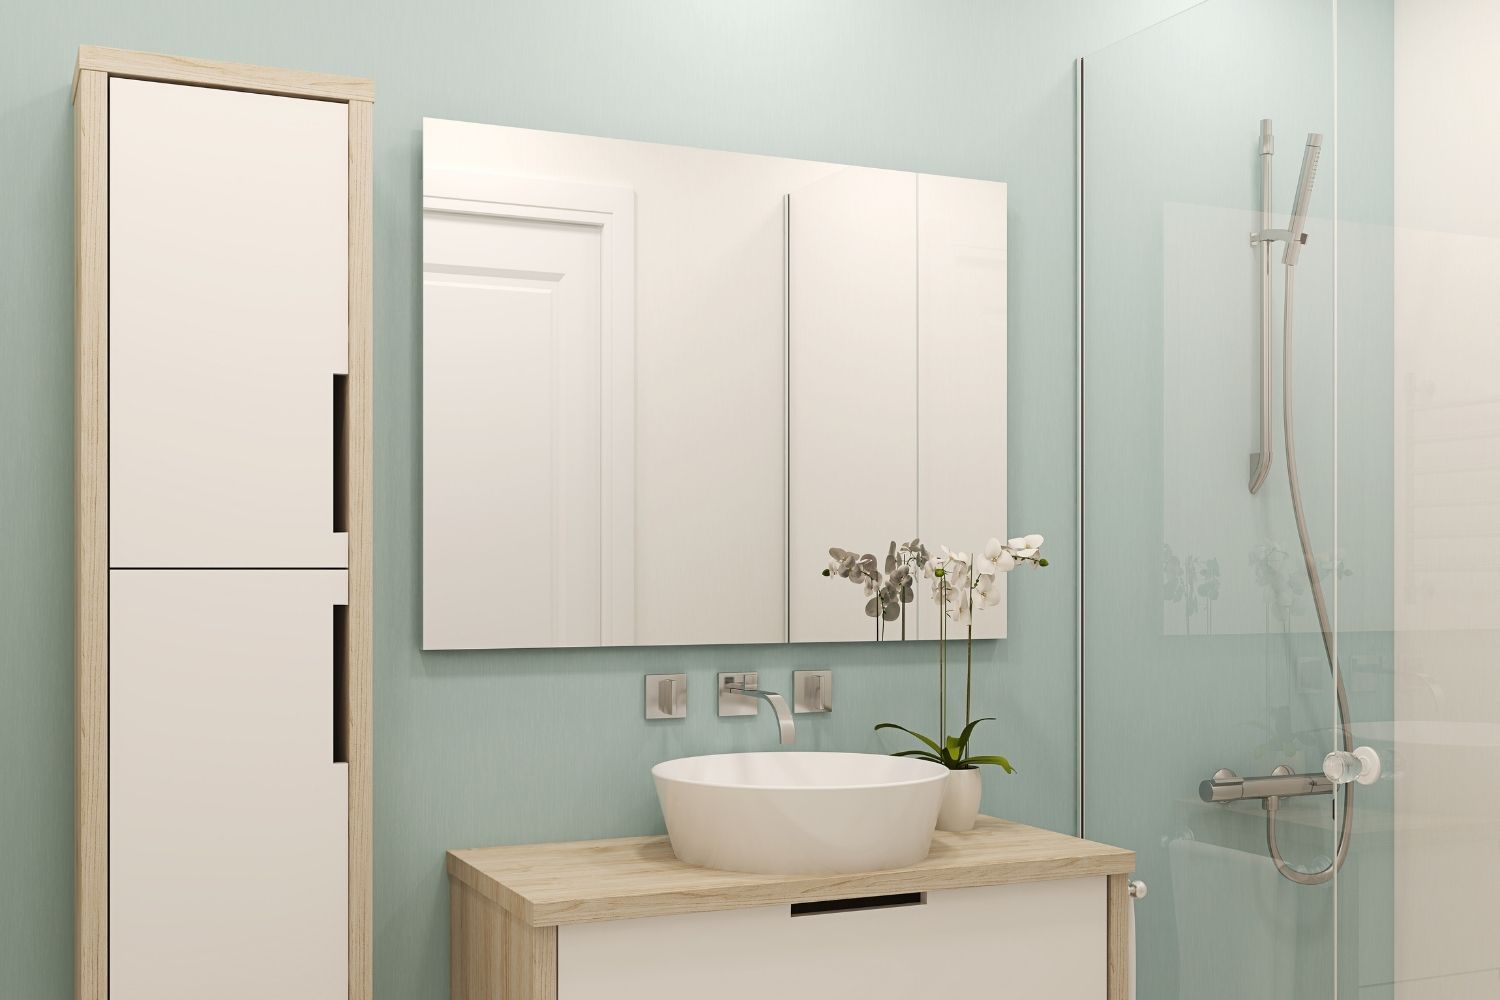 13 Of The Best Paint Colors For Small Bathrooms Without Windows Explore Wall Decor - What To Paint A Bathroom With No Windows